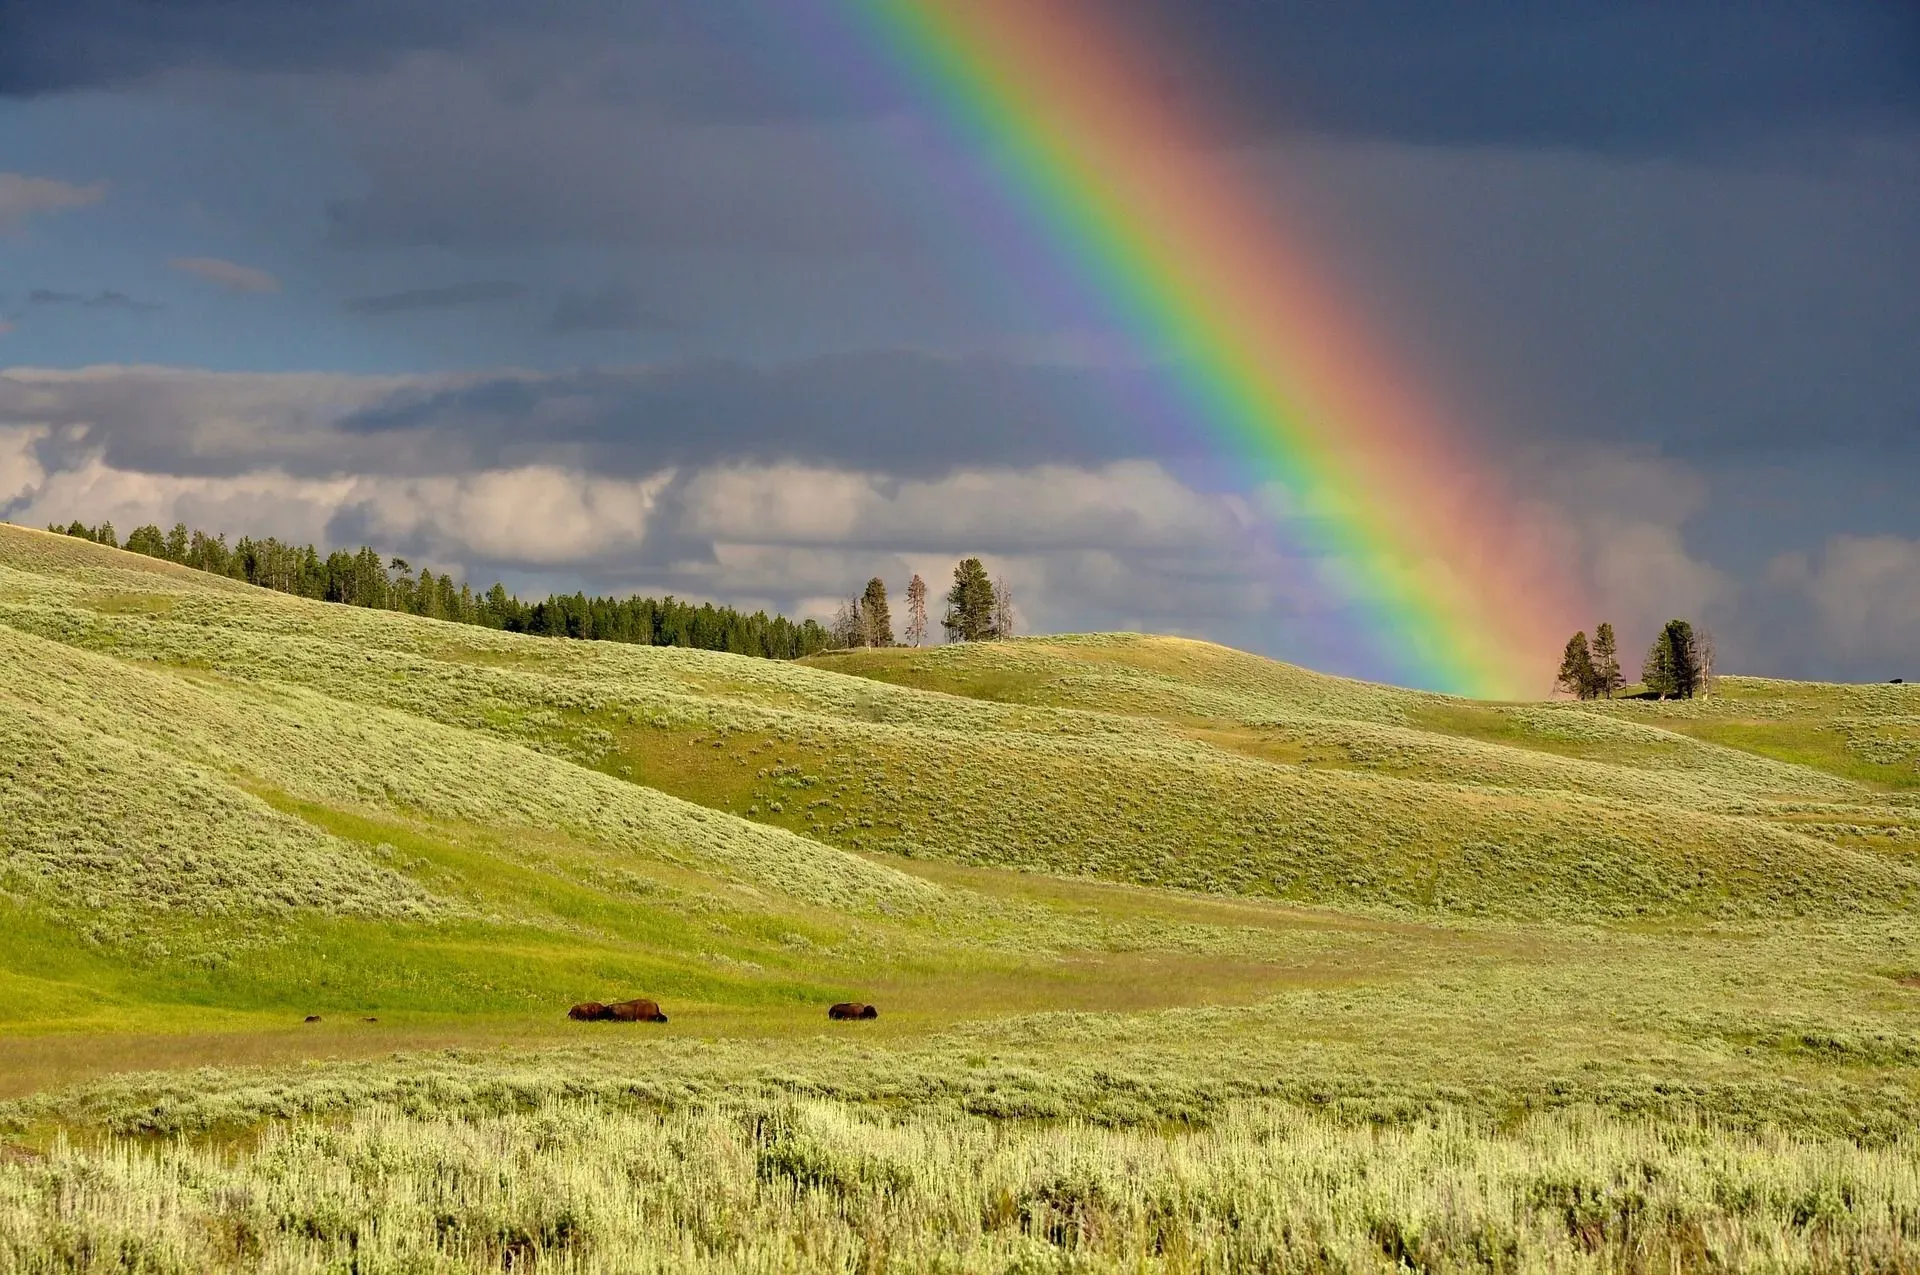 Different types of rainbows are visible after rain in various regions.